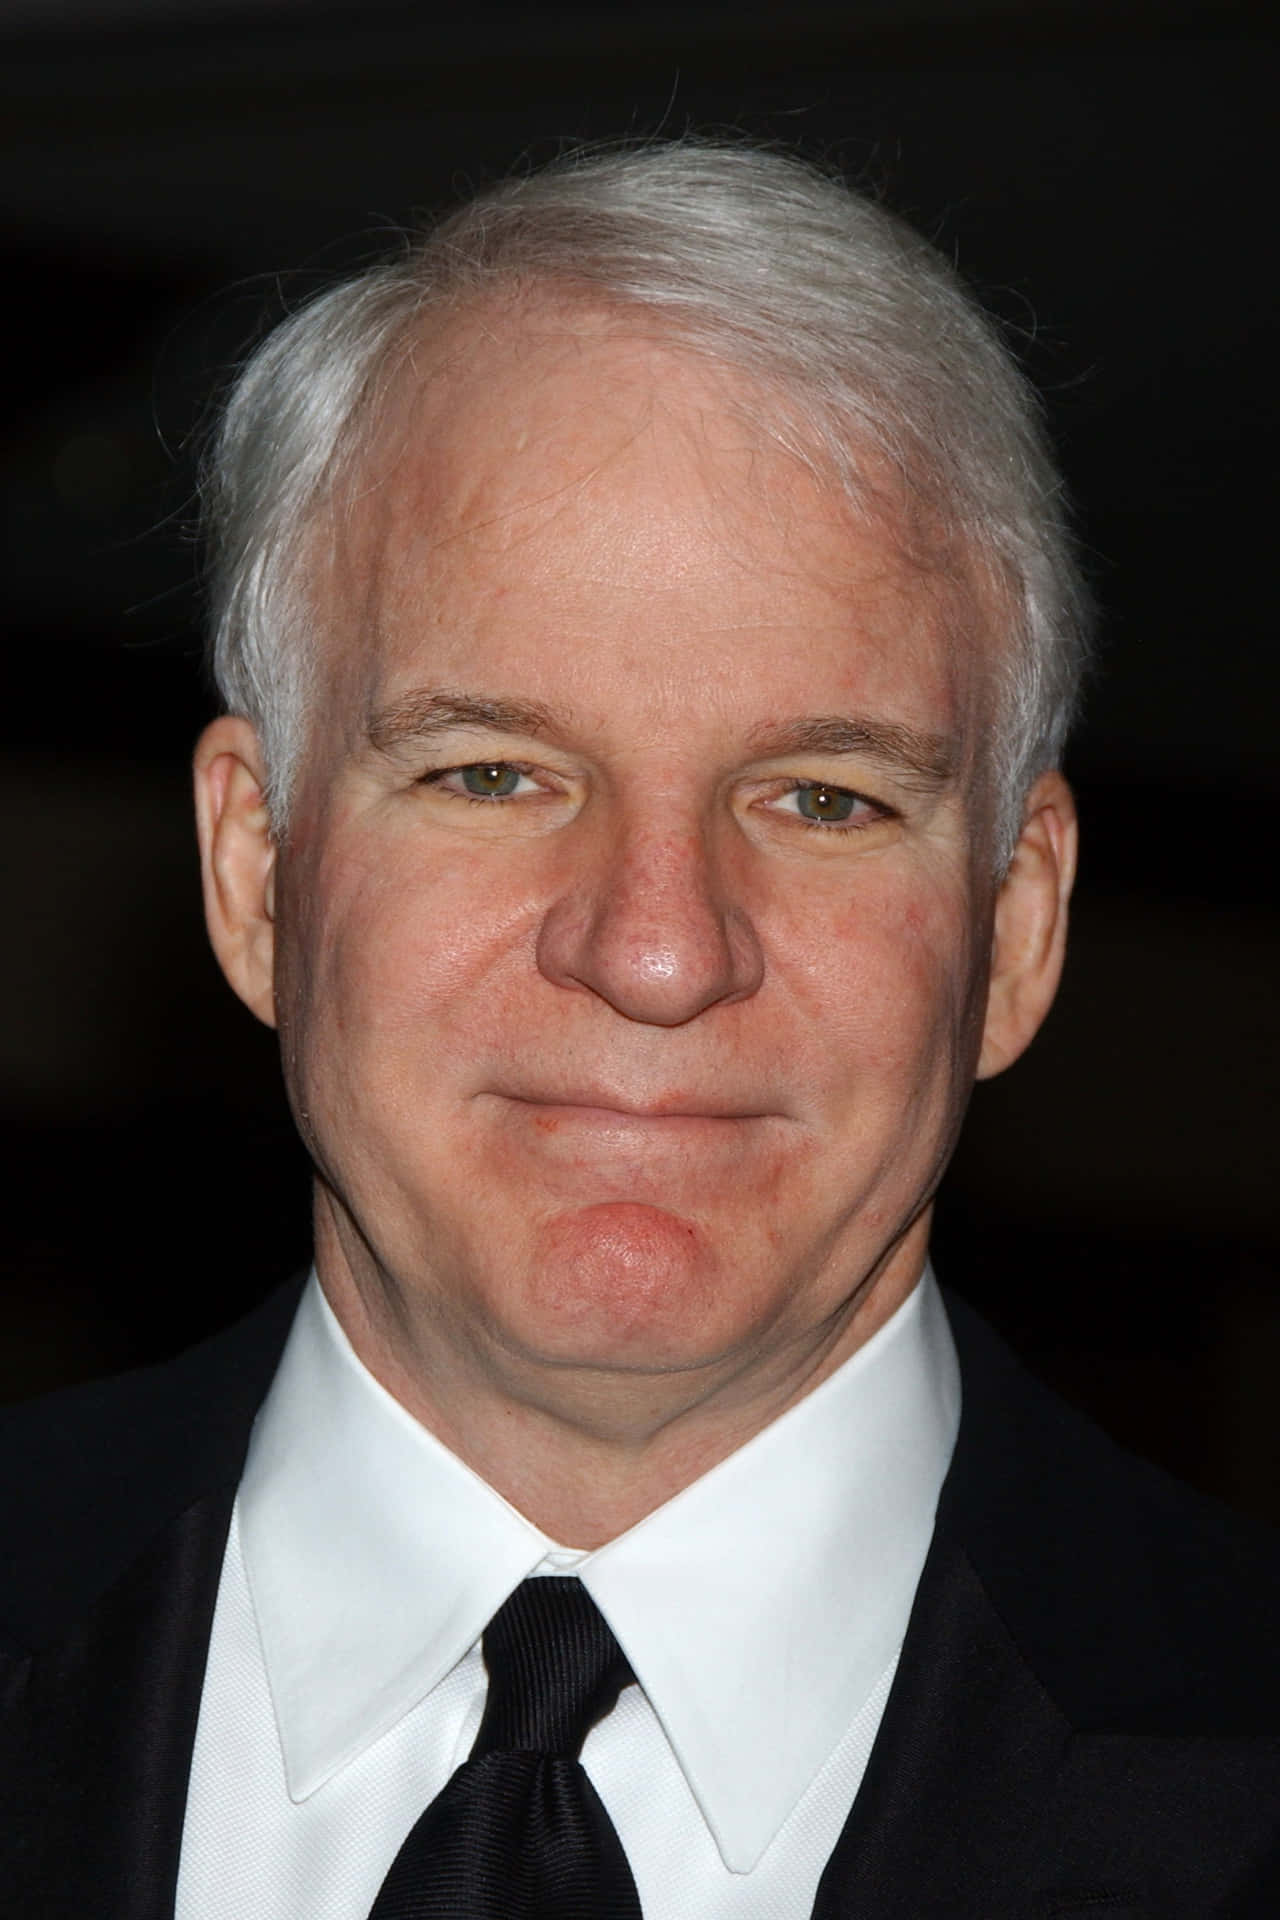 Steve Martin brings laughs to the stage Wallpaper